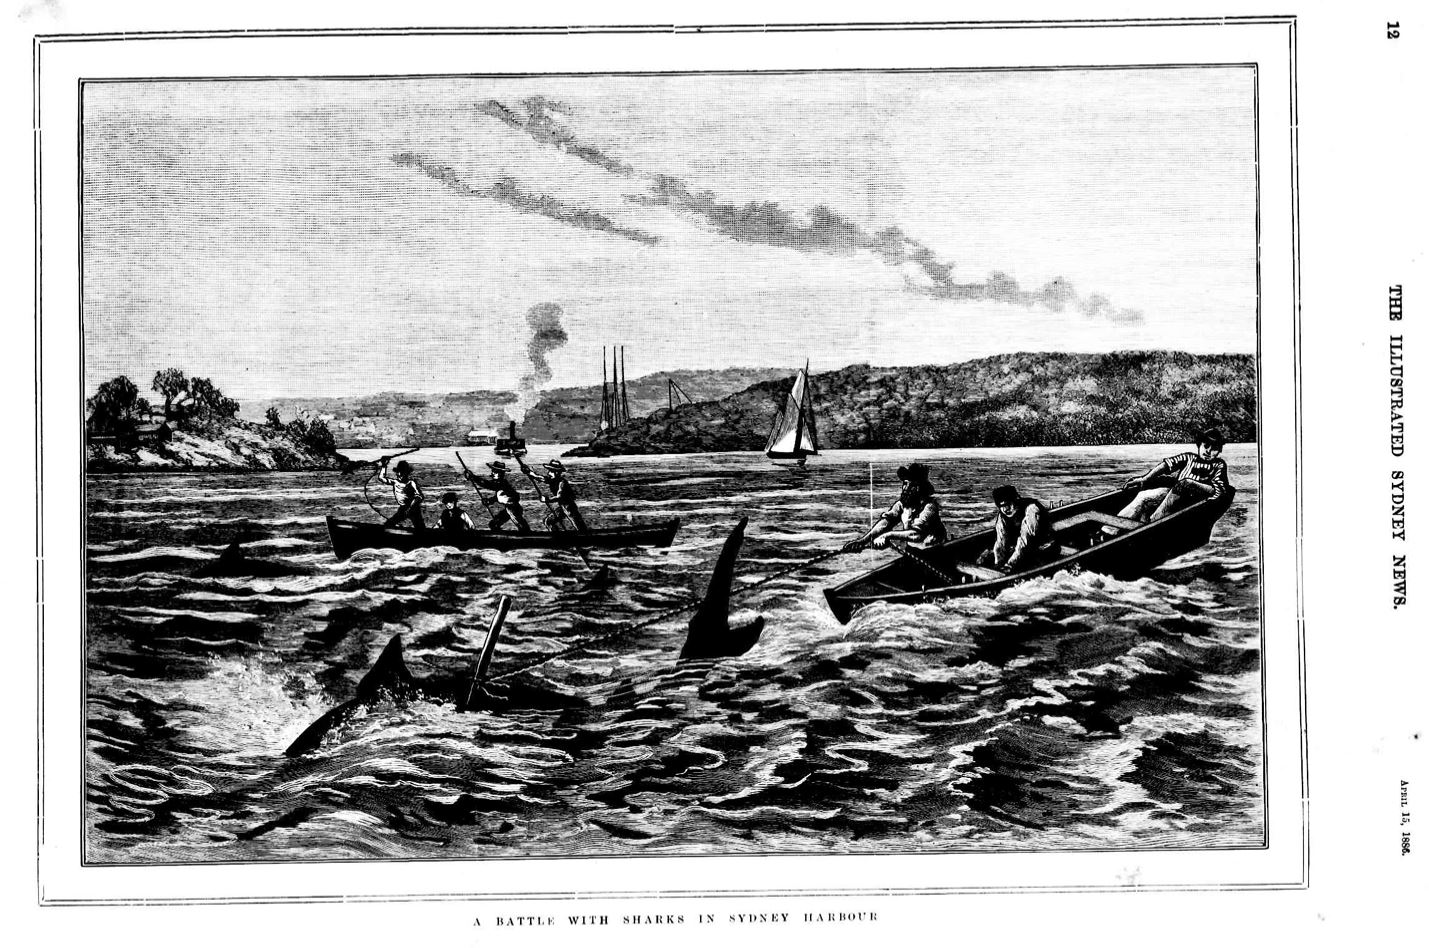 Black and white lithograph image of men in boats battling sharks in Berry Bay, Sydney Harbour